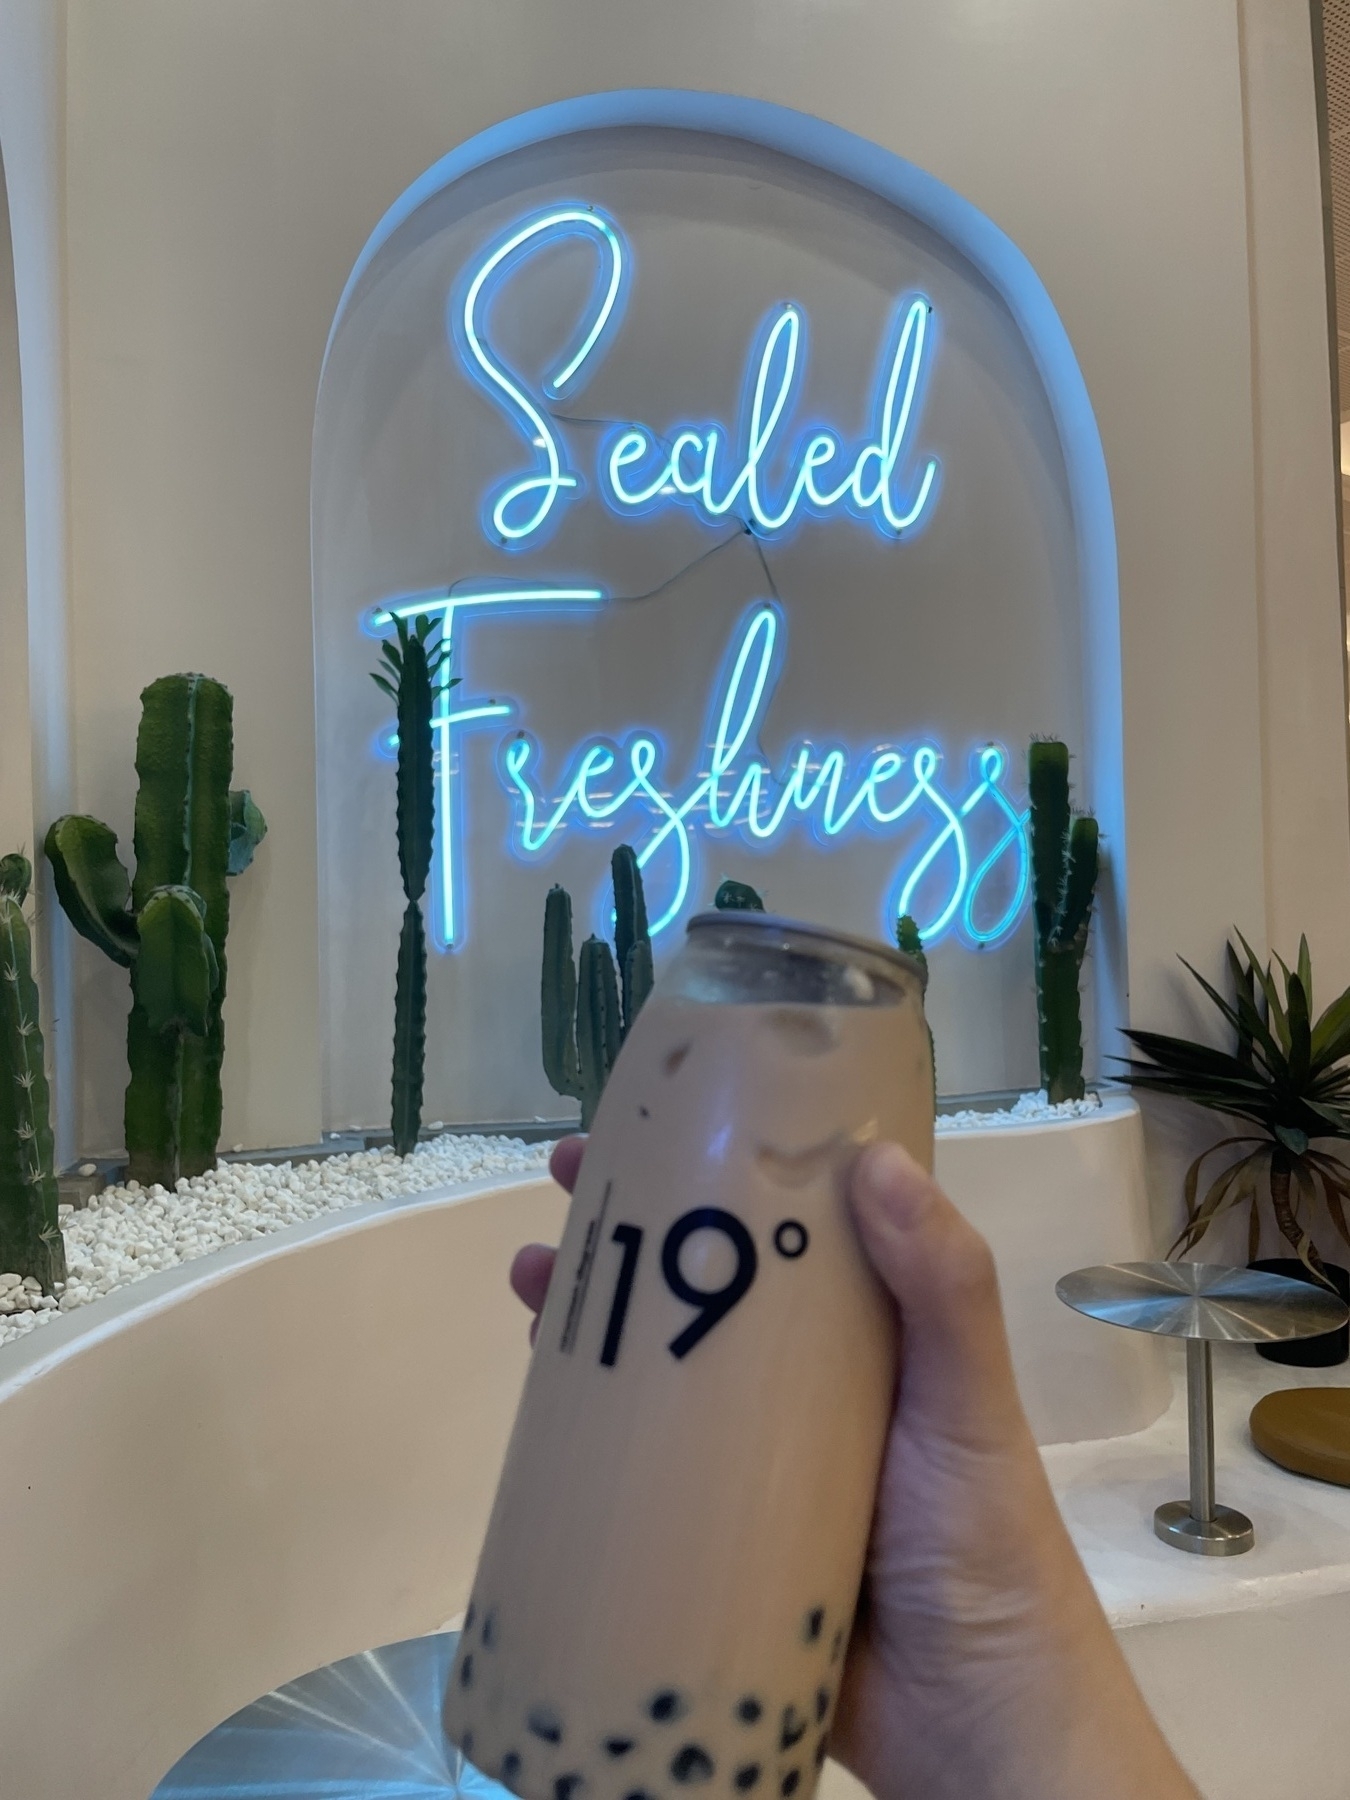 Chi is holding up an iced coffee beverage in a container with the label 19° on it. In the background, a neon sign that reads "Sealed Freshness" in cursive is surrounded by fake cacti plants on a white wall.